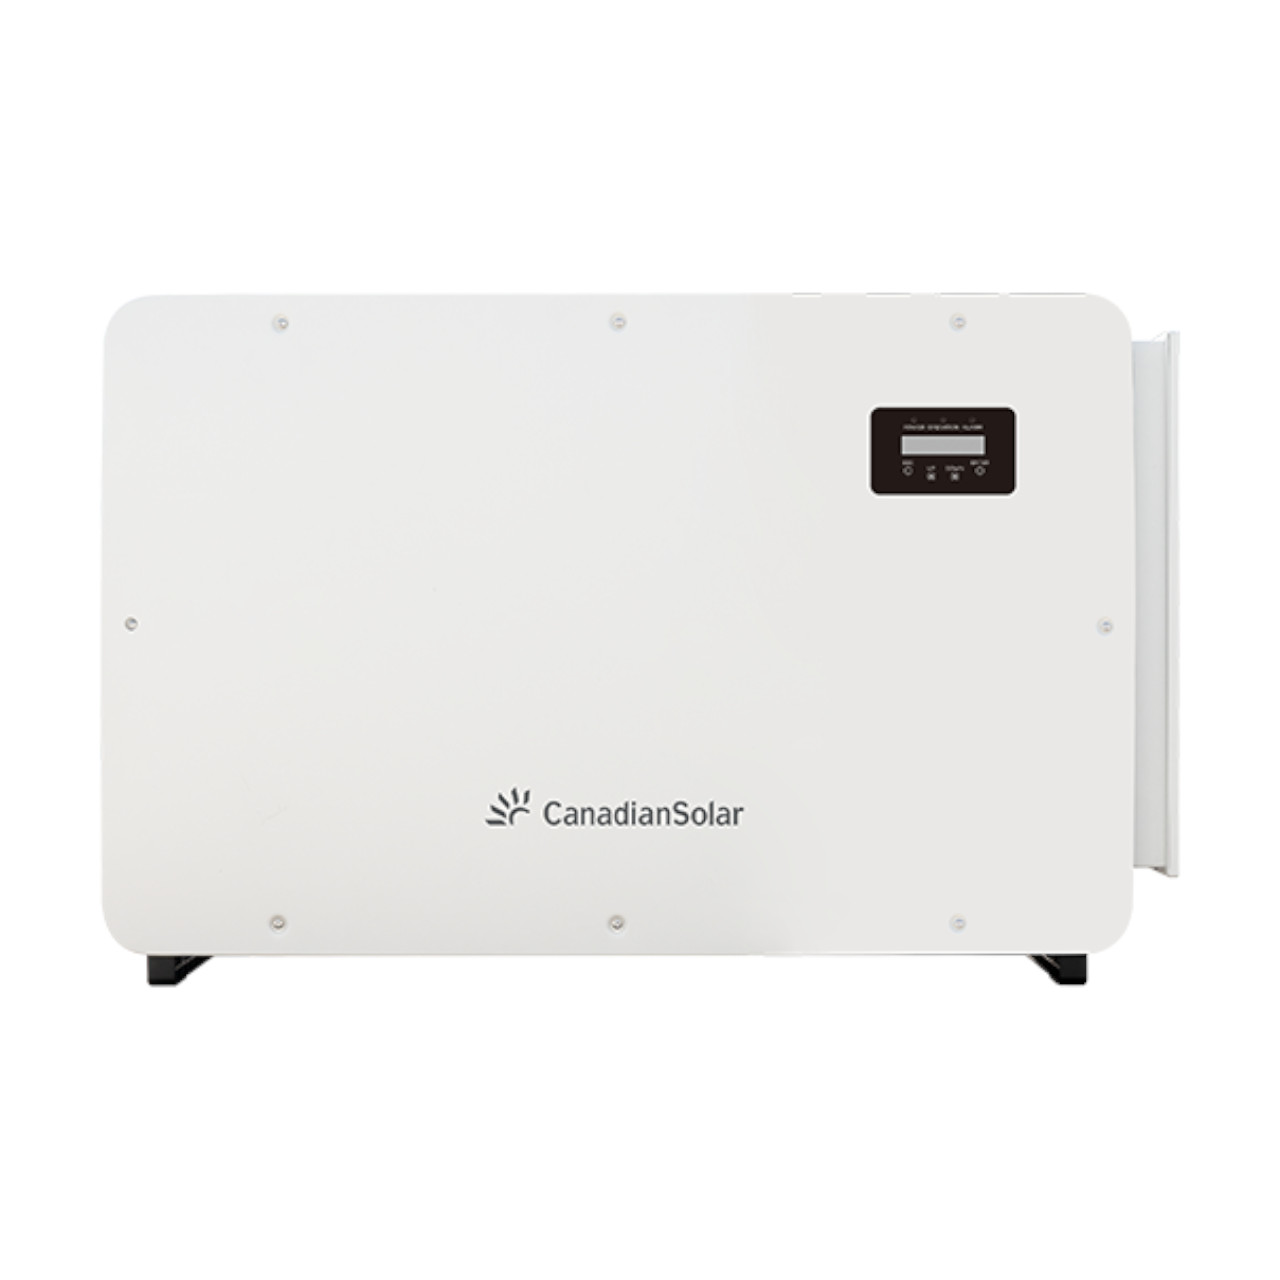 Frankensolar Americas Inc. to become Exclusive Value-Added Partner for Canadian Solar 600VAC / 1500VDC Three Phase Inverters in Canadian Market